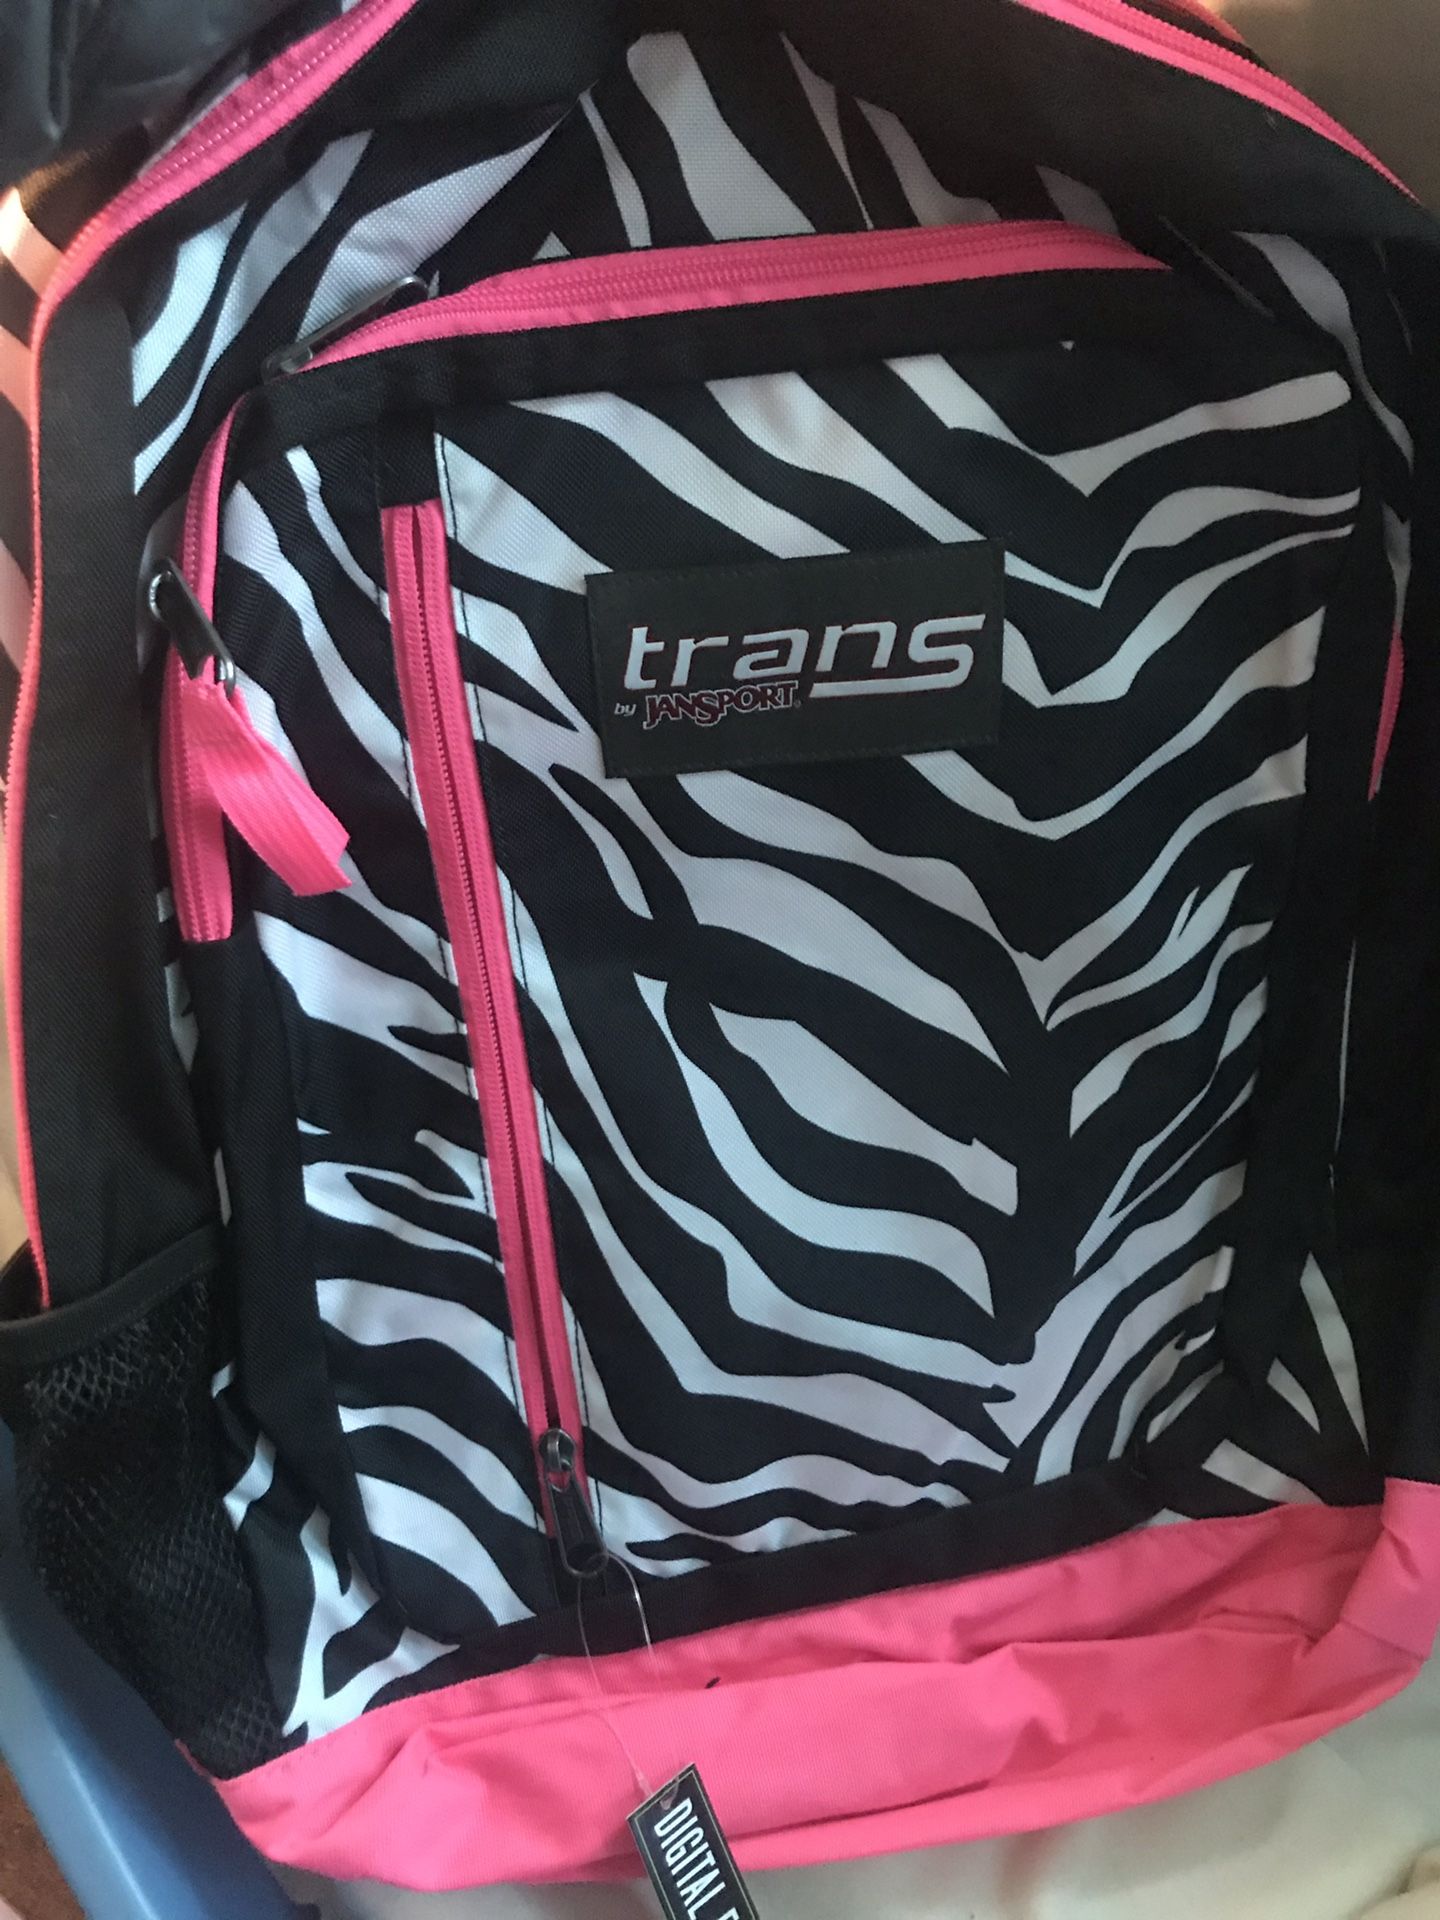 Trans by Jansport backpack